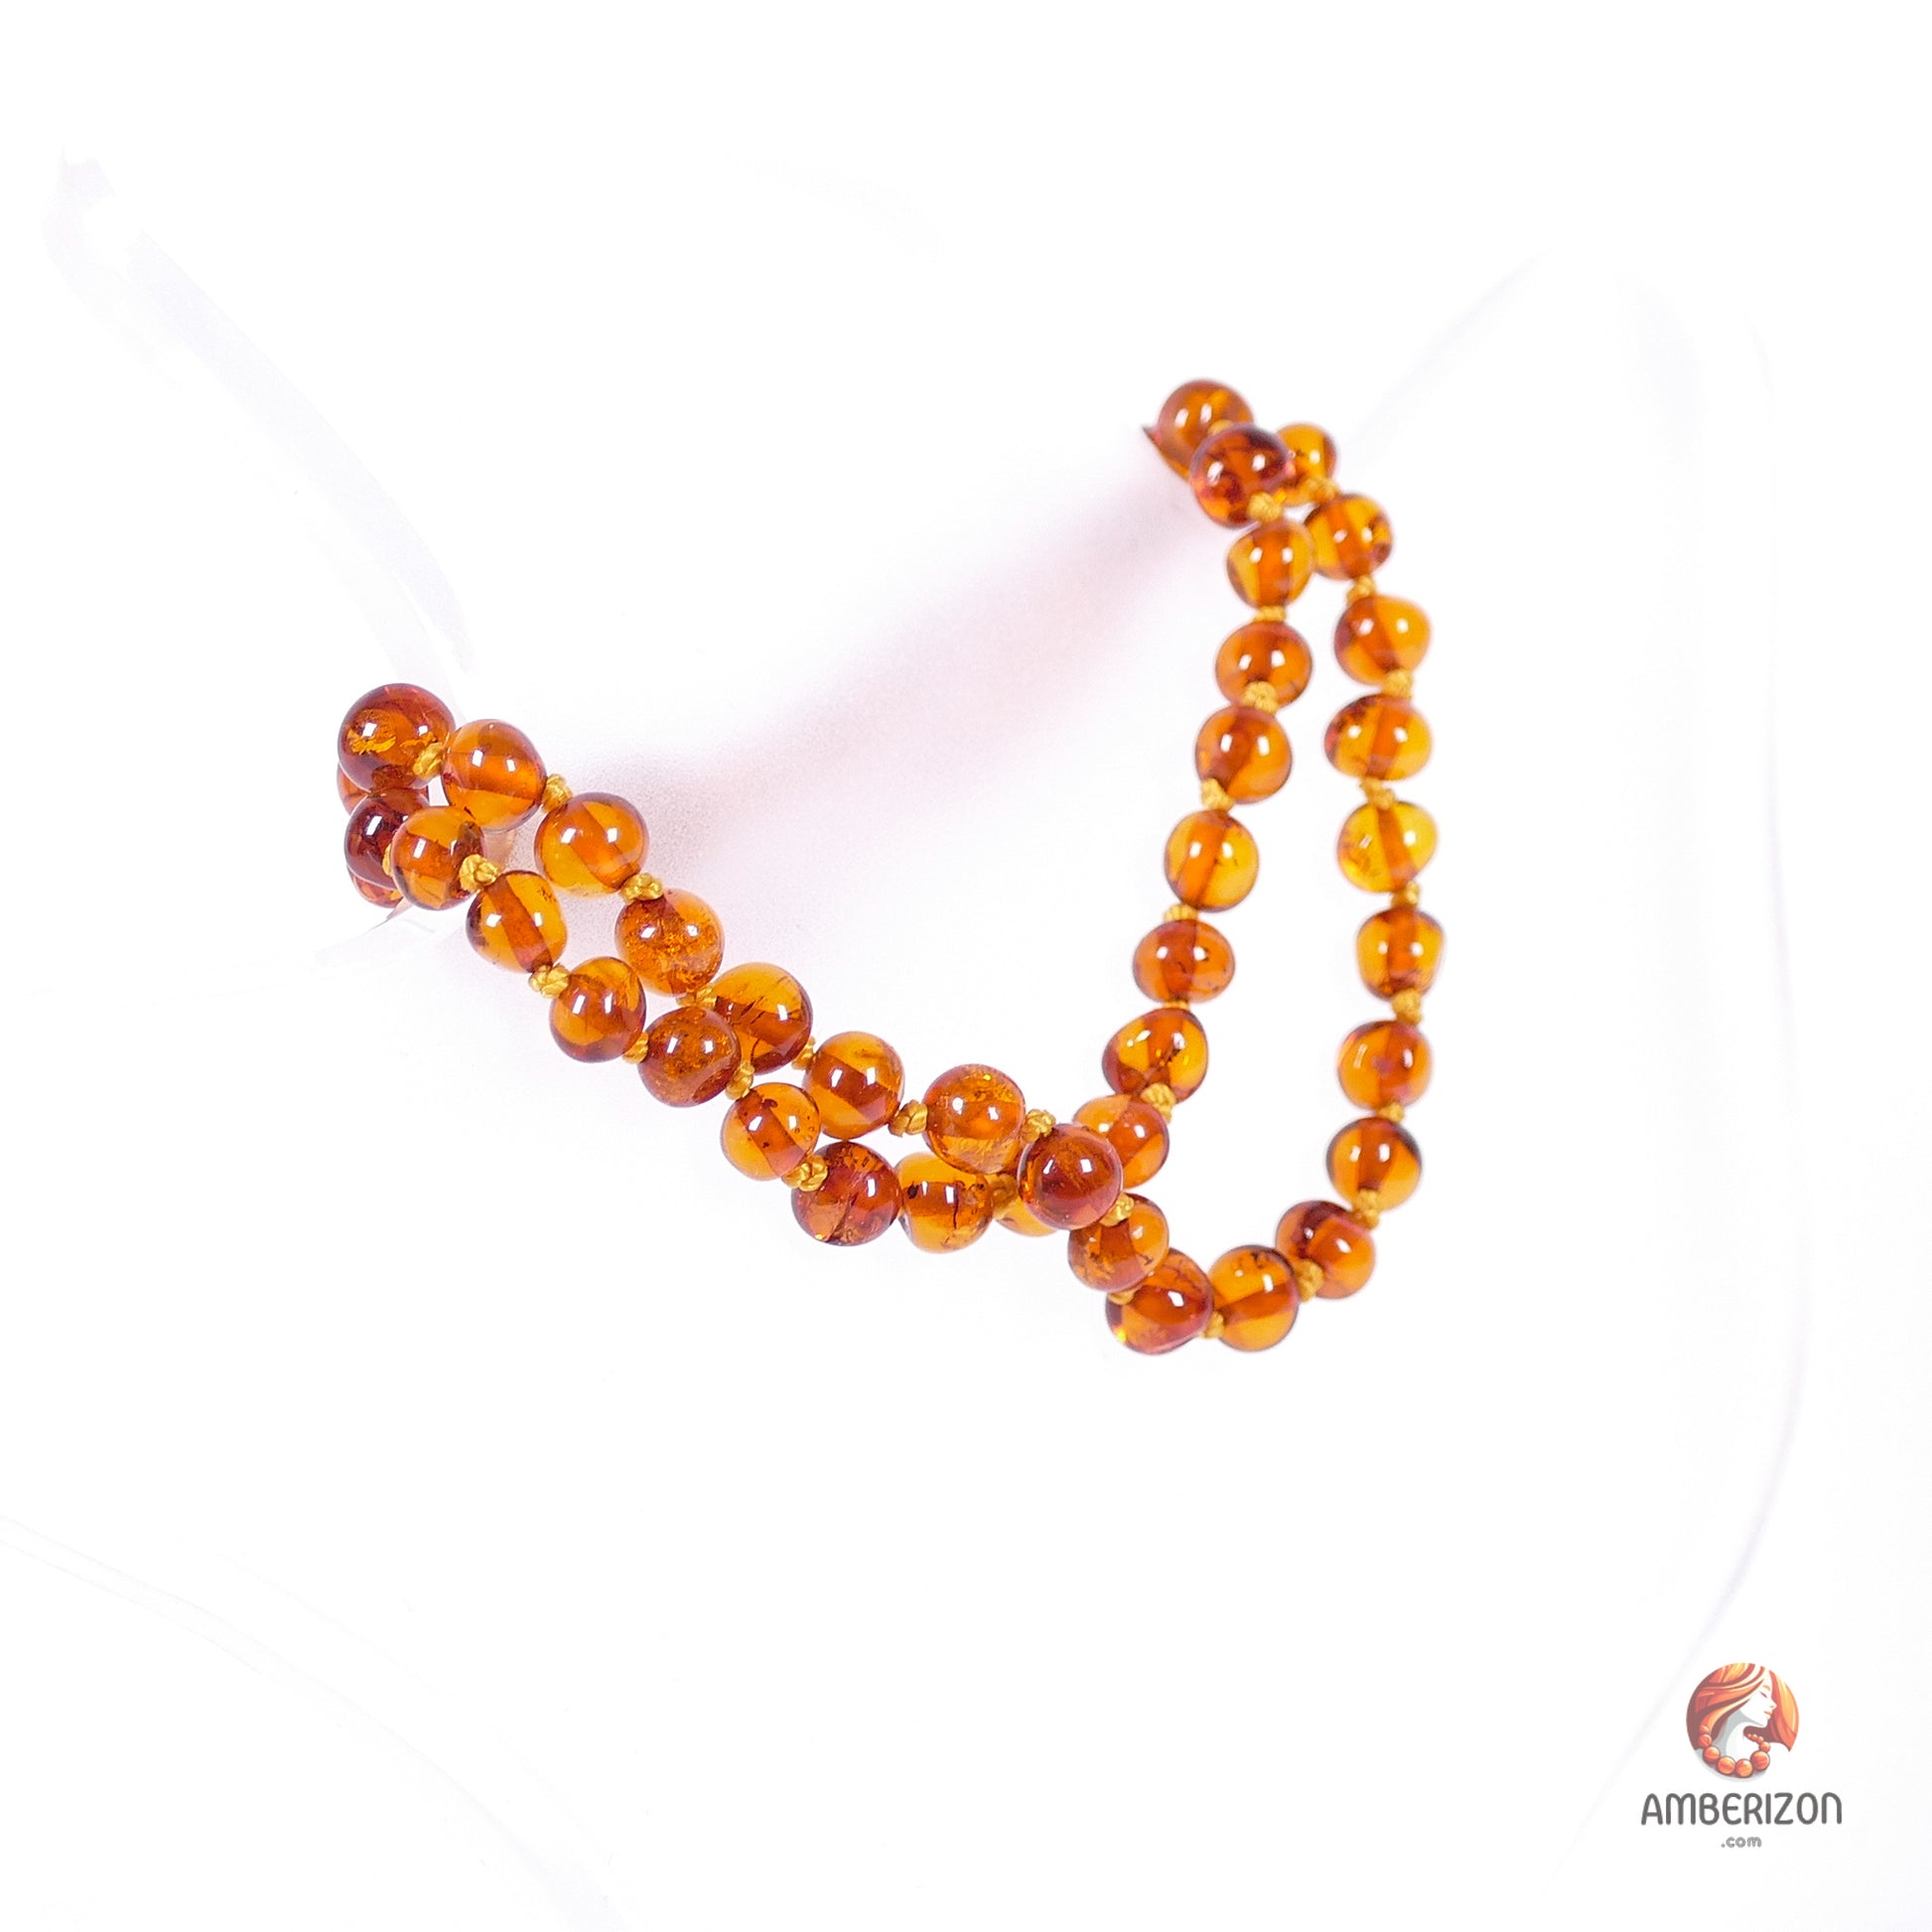 Handcrafted Adult Unisex Baltic Amber Necklace - Versatile Wear